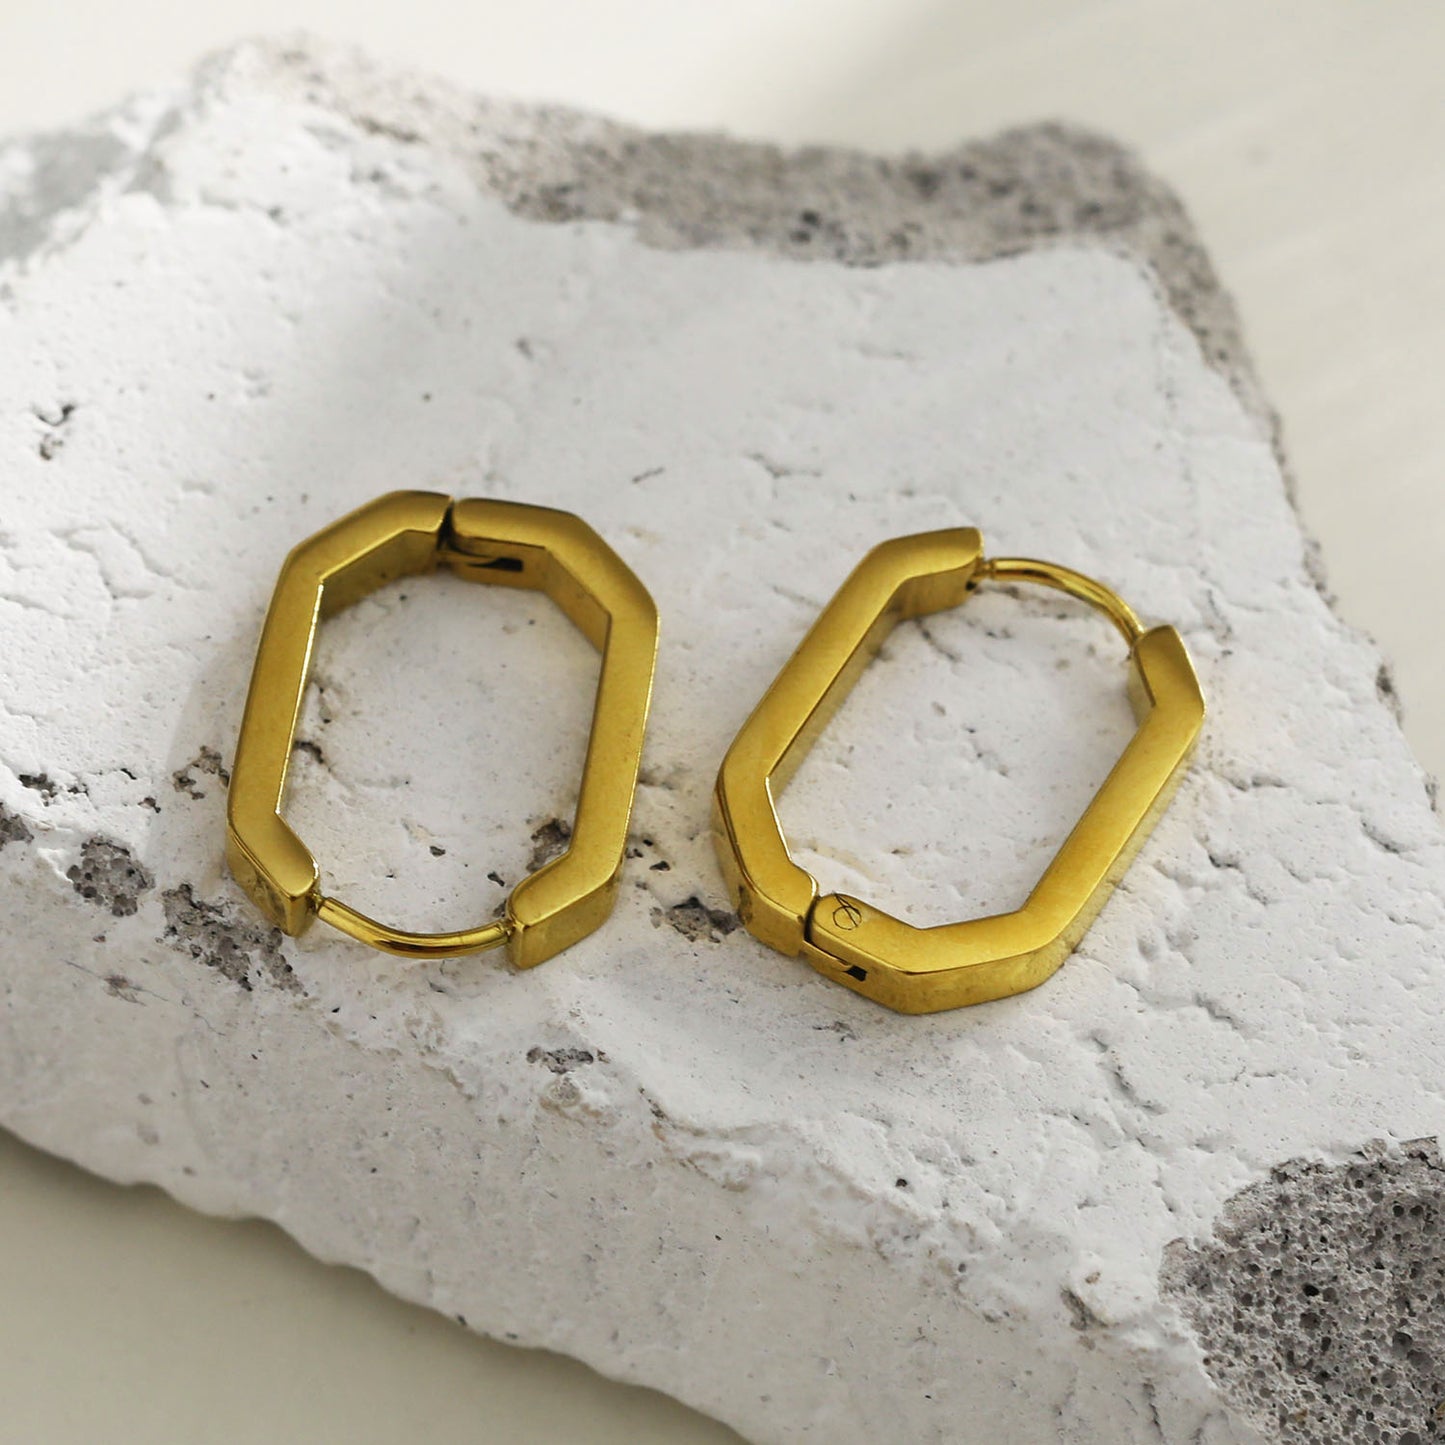 Style: CACCURI 122237 Geometric Shaped Contemporary Hoop Earrings.